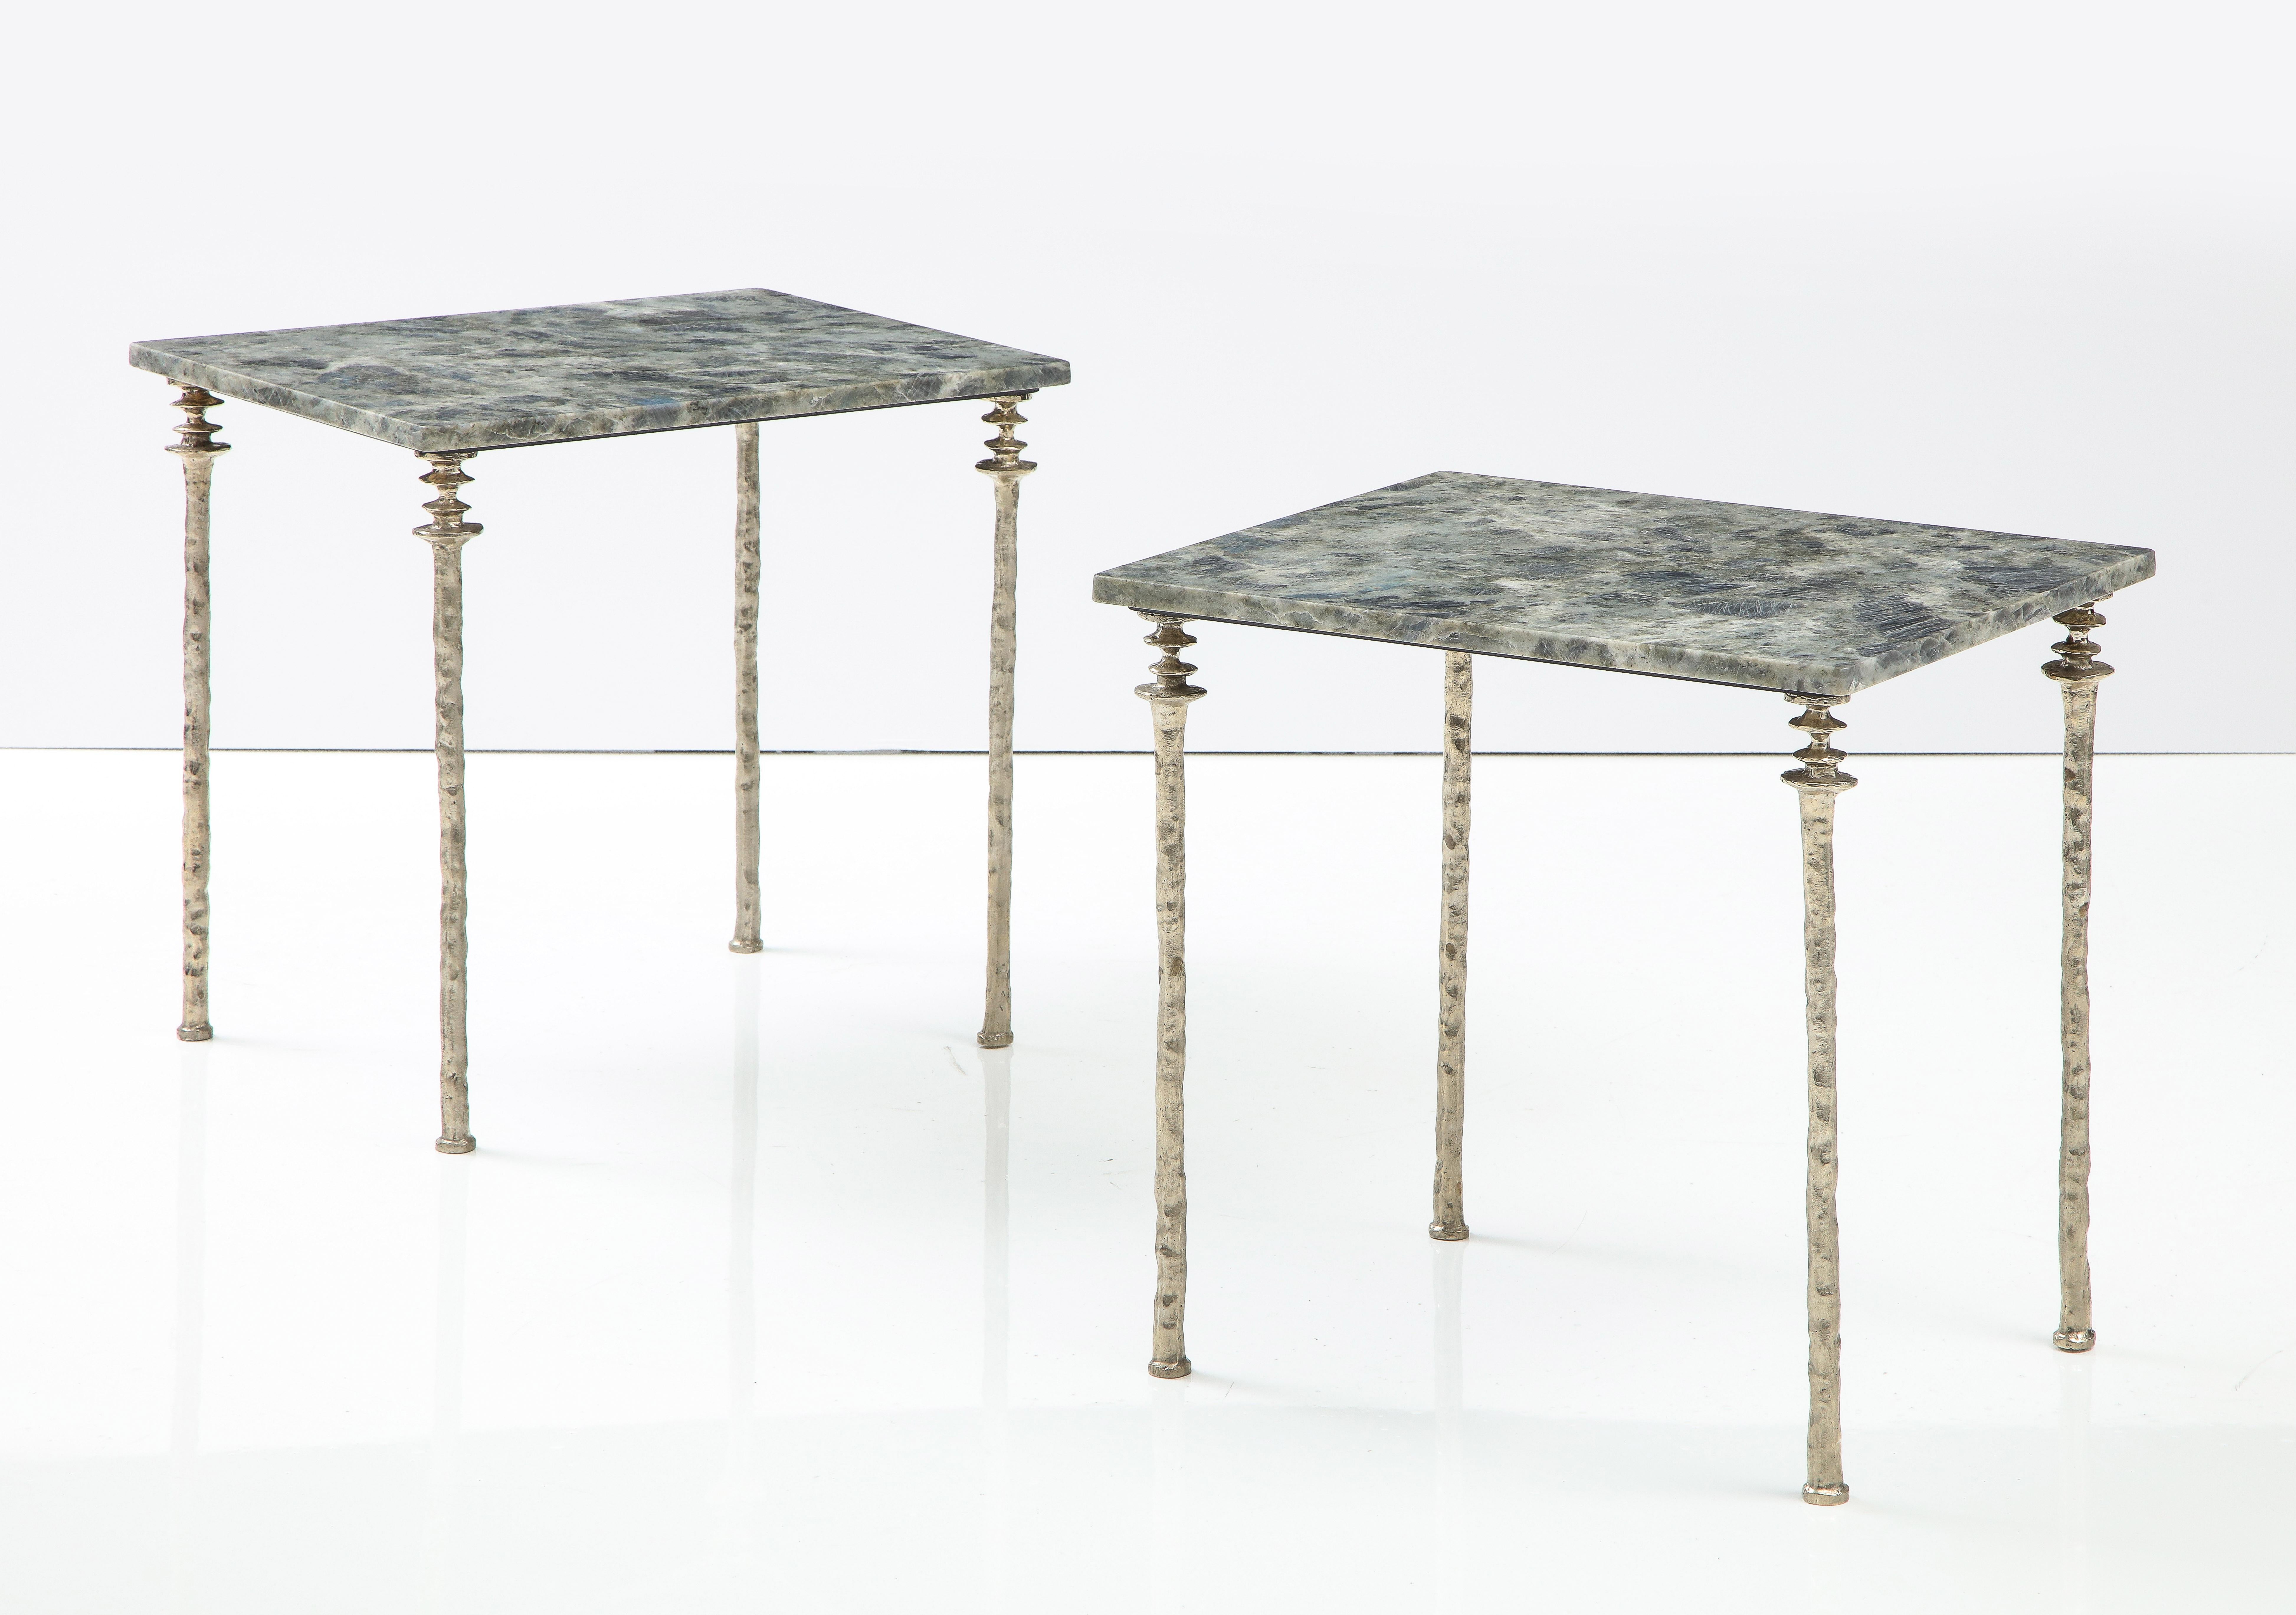 Two marble-topped side tables, with our signature legs. The legs are cast white bronze. Unique organic texture of the bronze legs. The marble on these pair is a grey/black/blue crystalized marble.